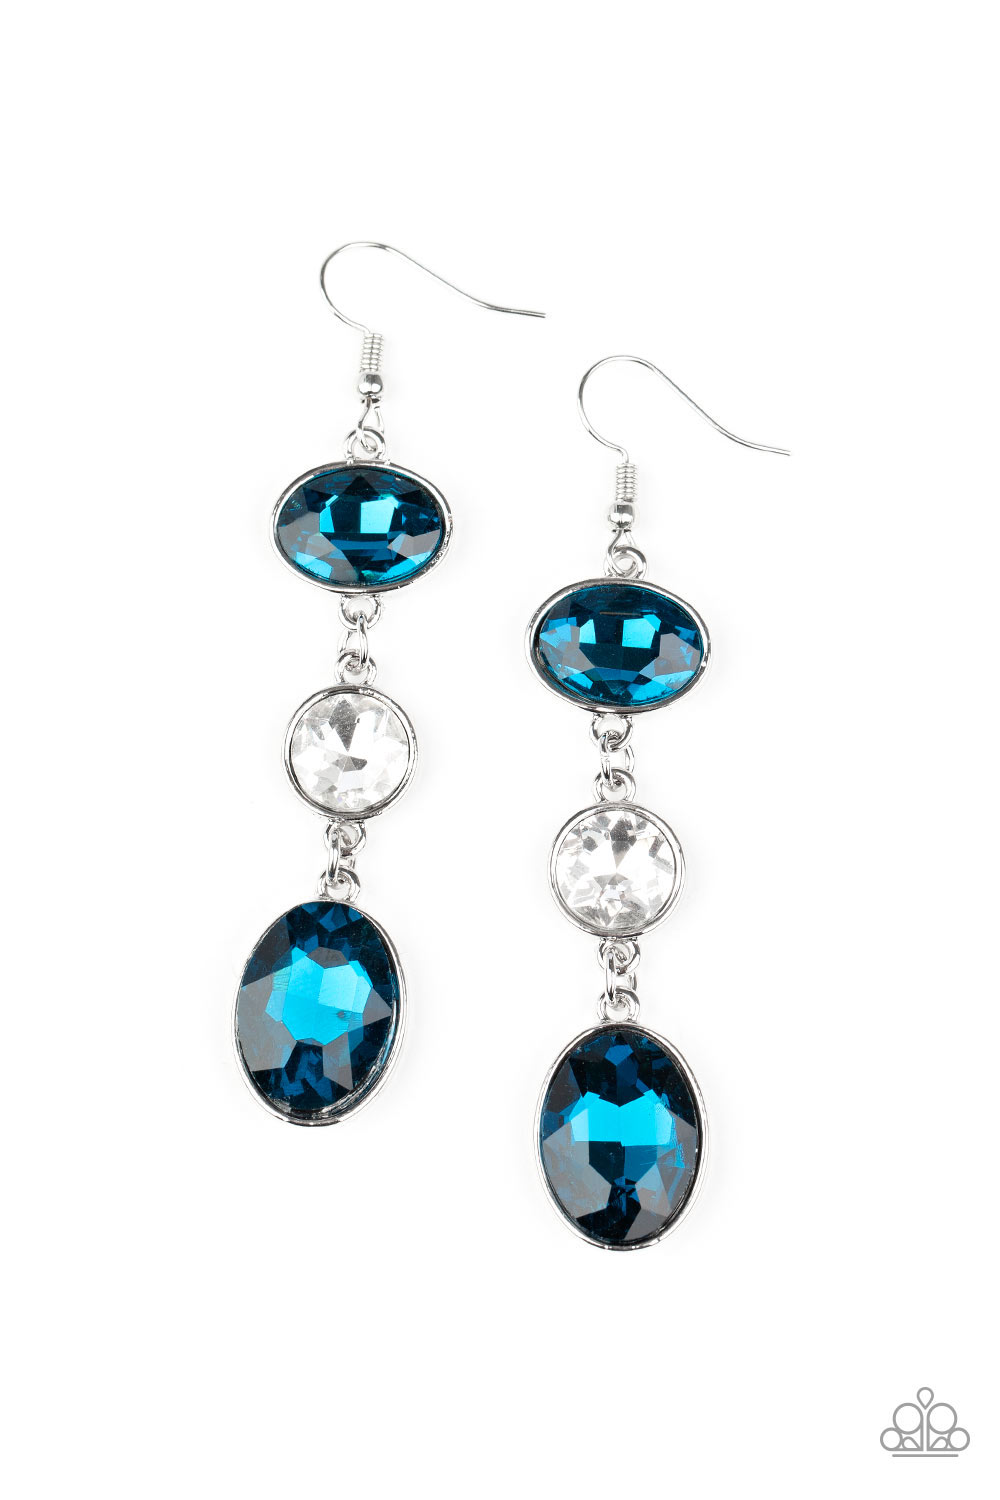 Paparazzi Earring ~ The GLOW Must Go On! - Blue